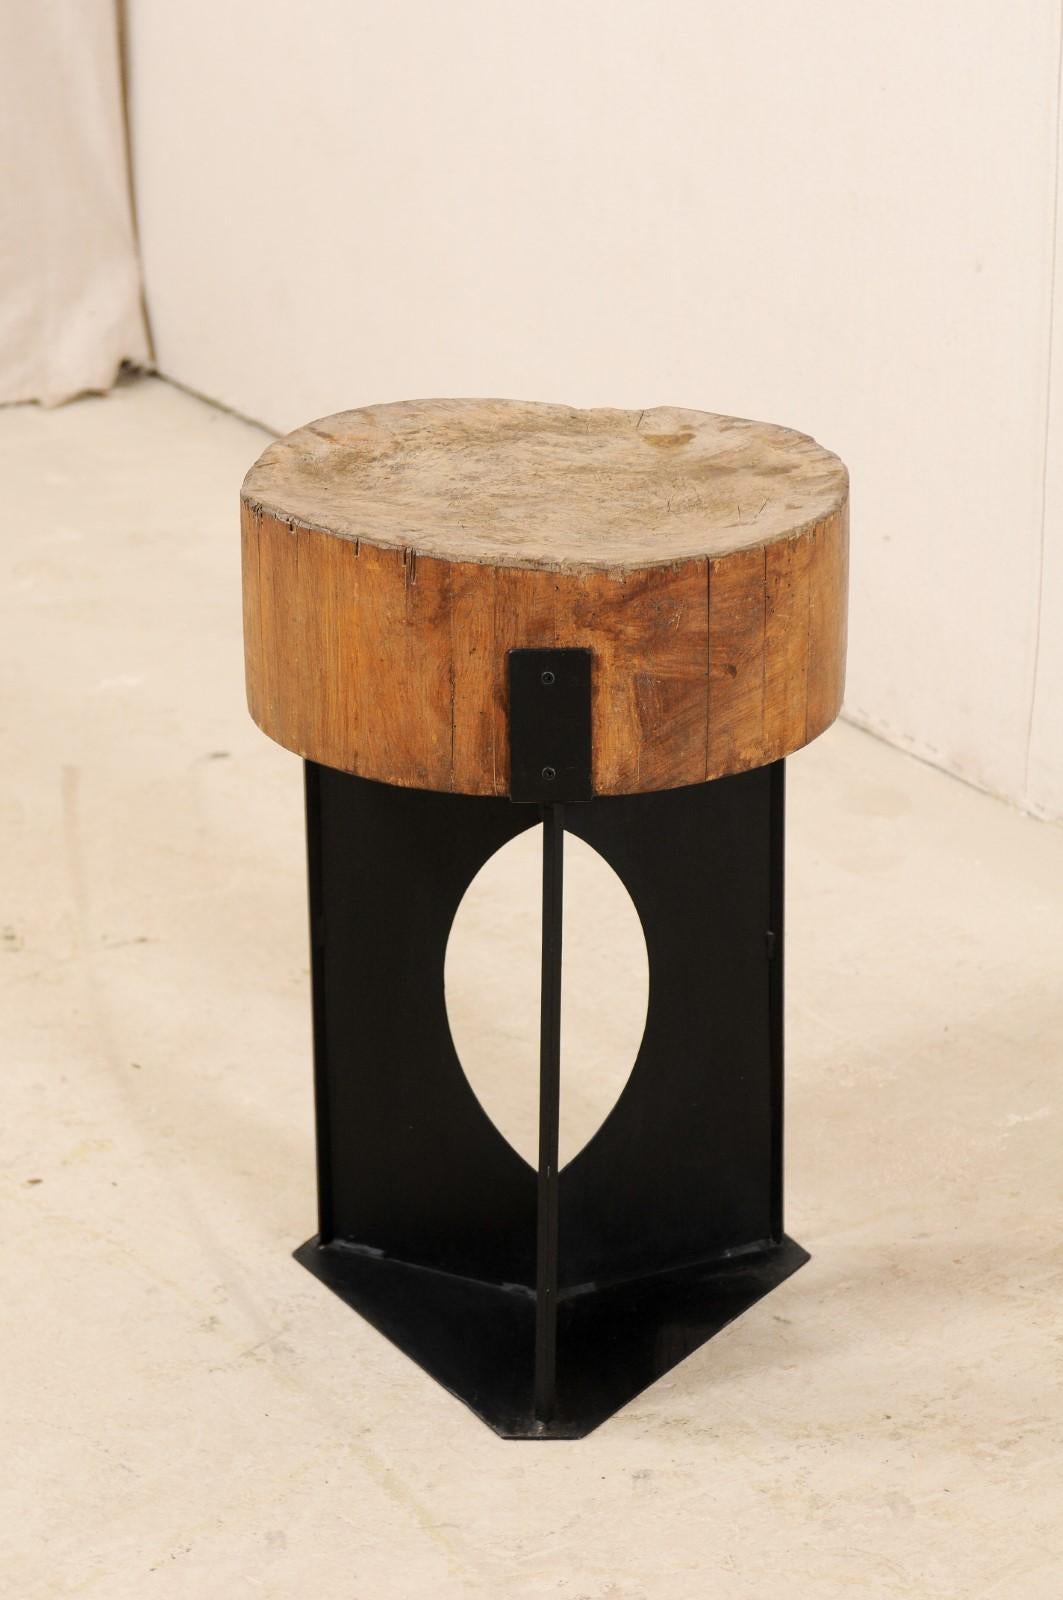 This modern-designed side table has been custom fashioned with a European 19th century chopping block top mounted onto a contemporary iron base. This unique and one-of-a-kind piece has been created with an intriguing mix of rustic and modern